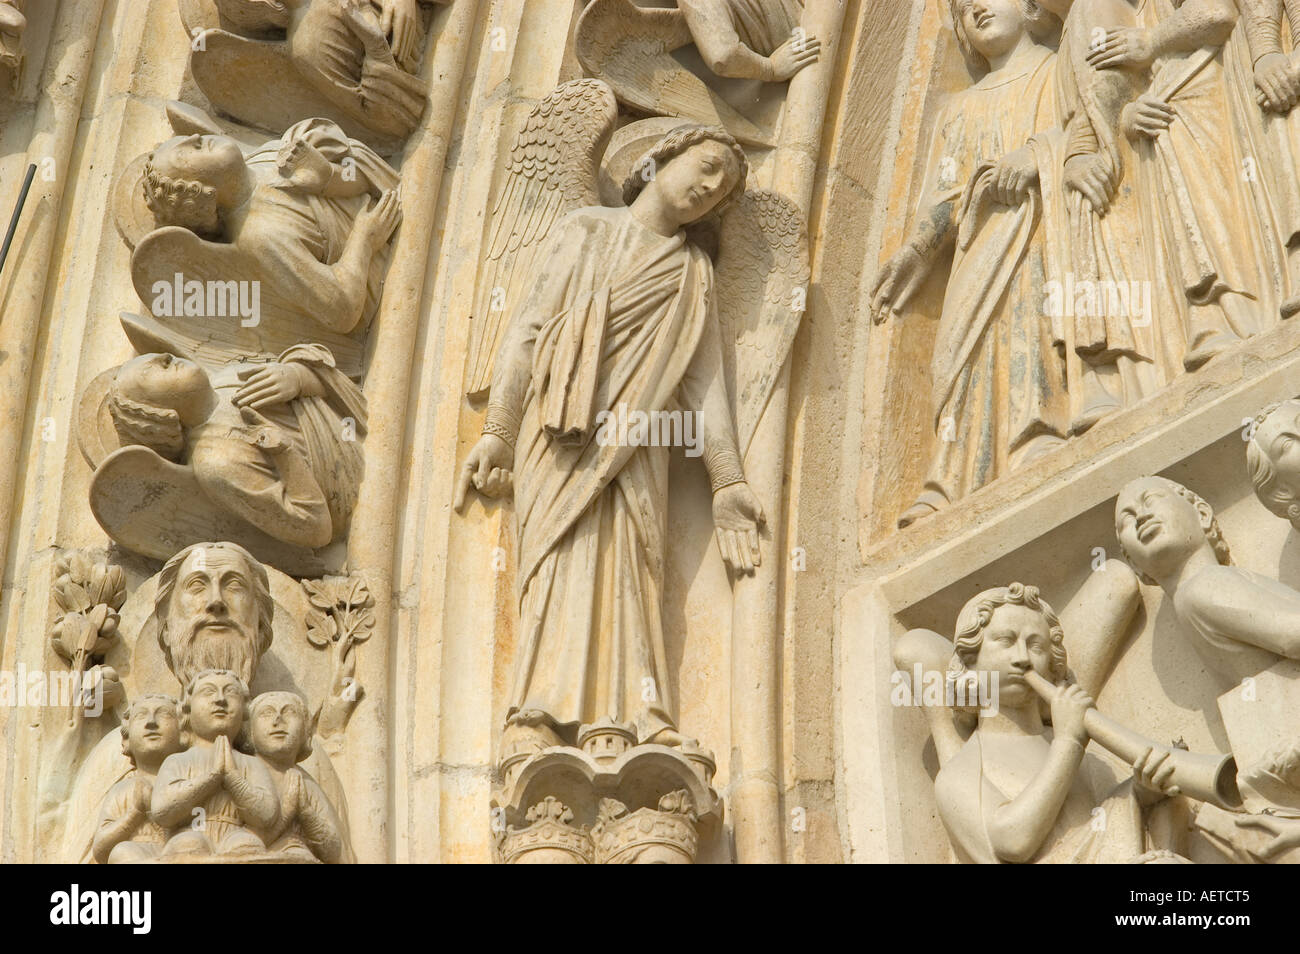 Paris, France. Cathedral of Notre Dame. Detail of figures to the left of Main Door or Porte de Jugement Stock Photo